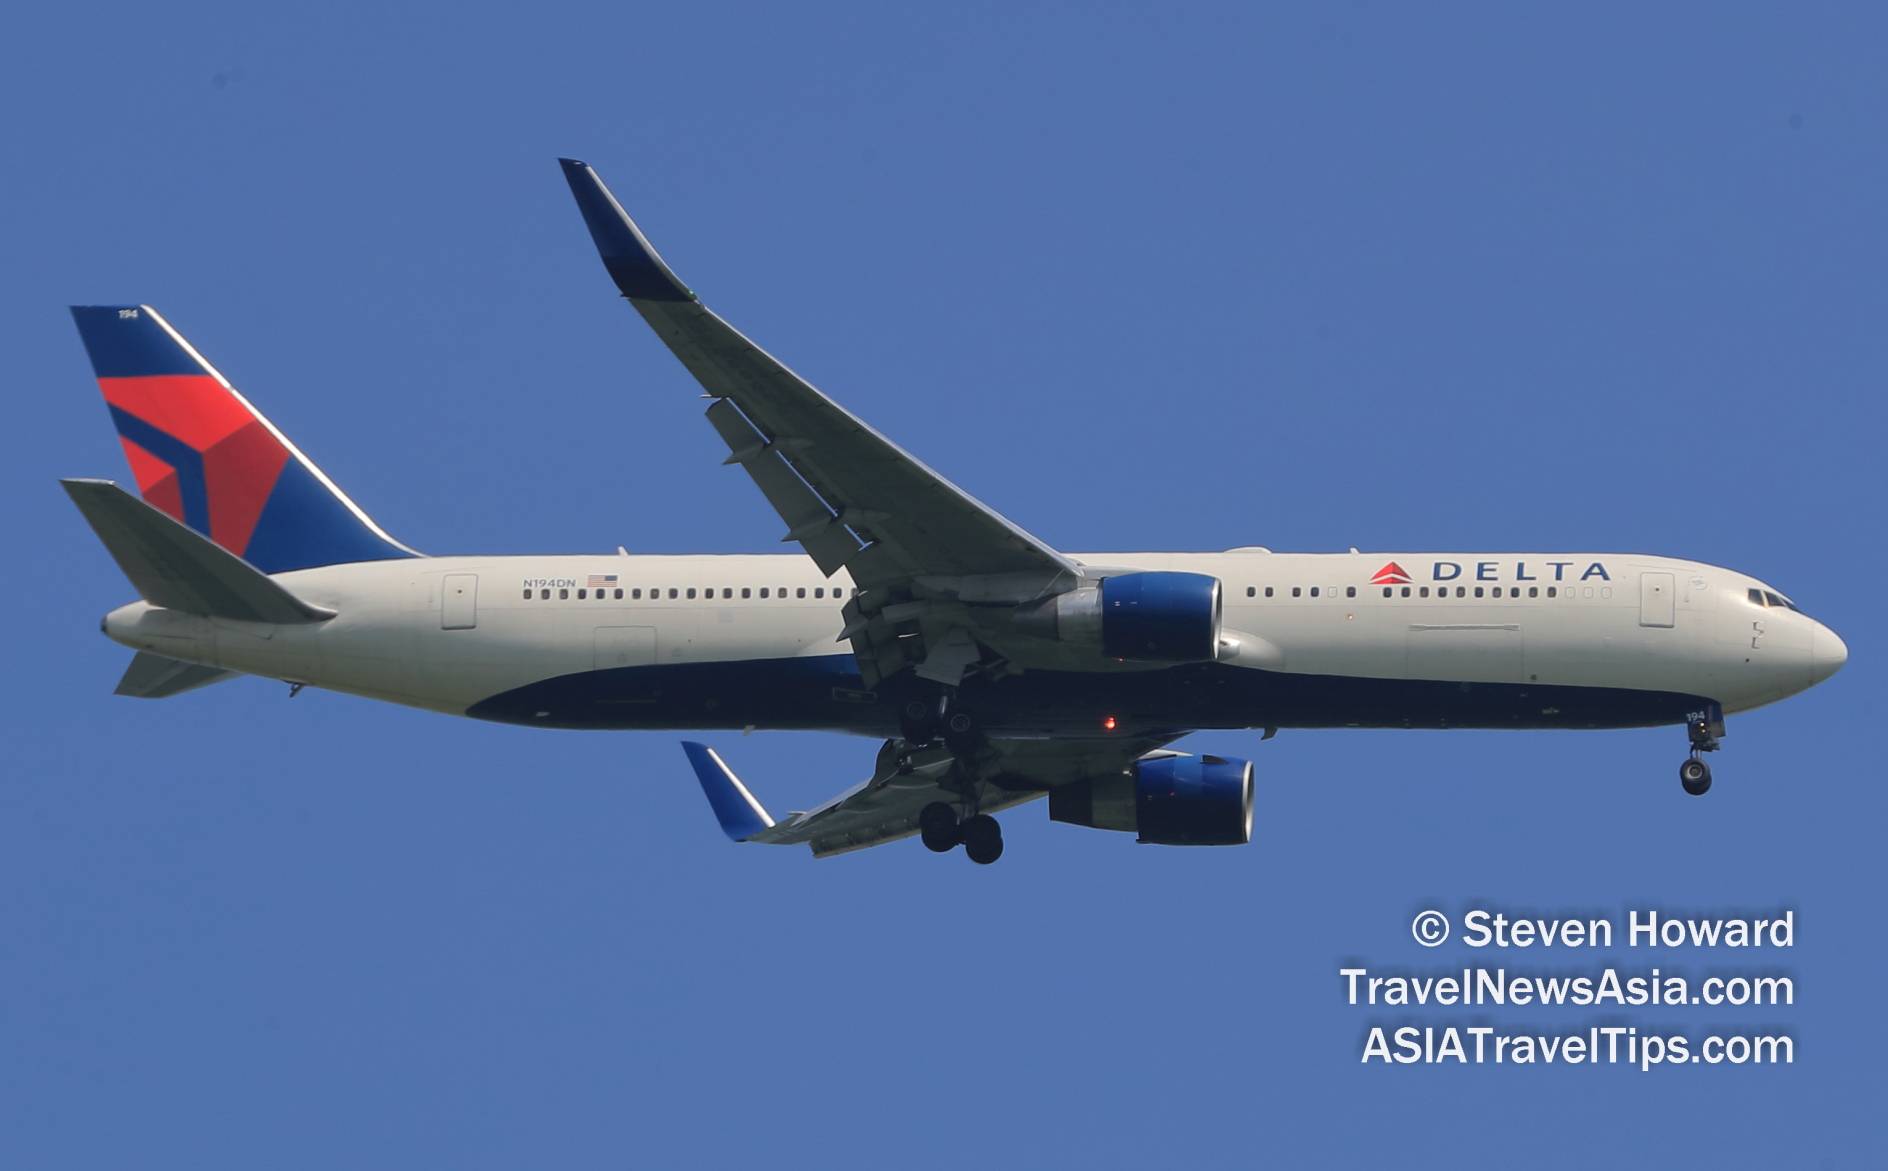 Delta Boeing 767 reg: N194DN. Picture by Steven Howard of TravelNewsAsia.com Click to enlarge.